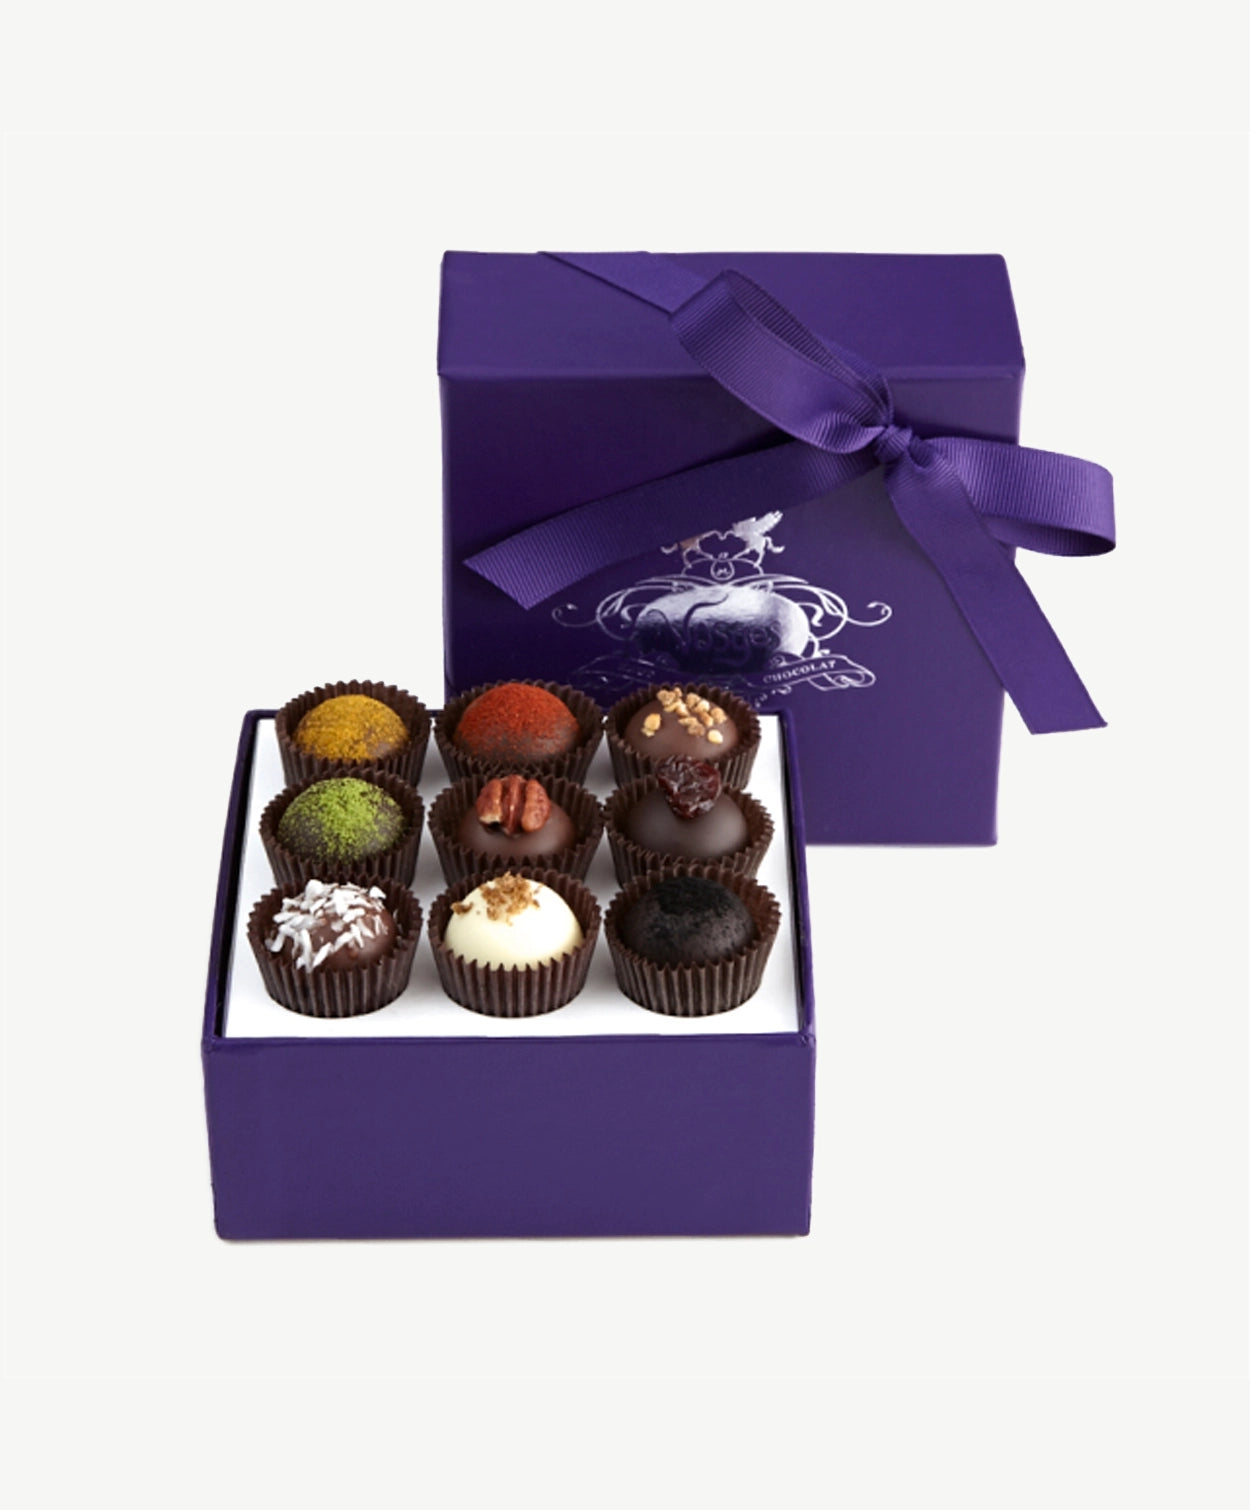 Open 9 piece Exotic Truffle Collection displaying chocolate truffles adorned with brightly colored toppings and included materials tied with a purple ribbon bow on a white background.